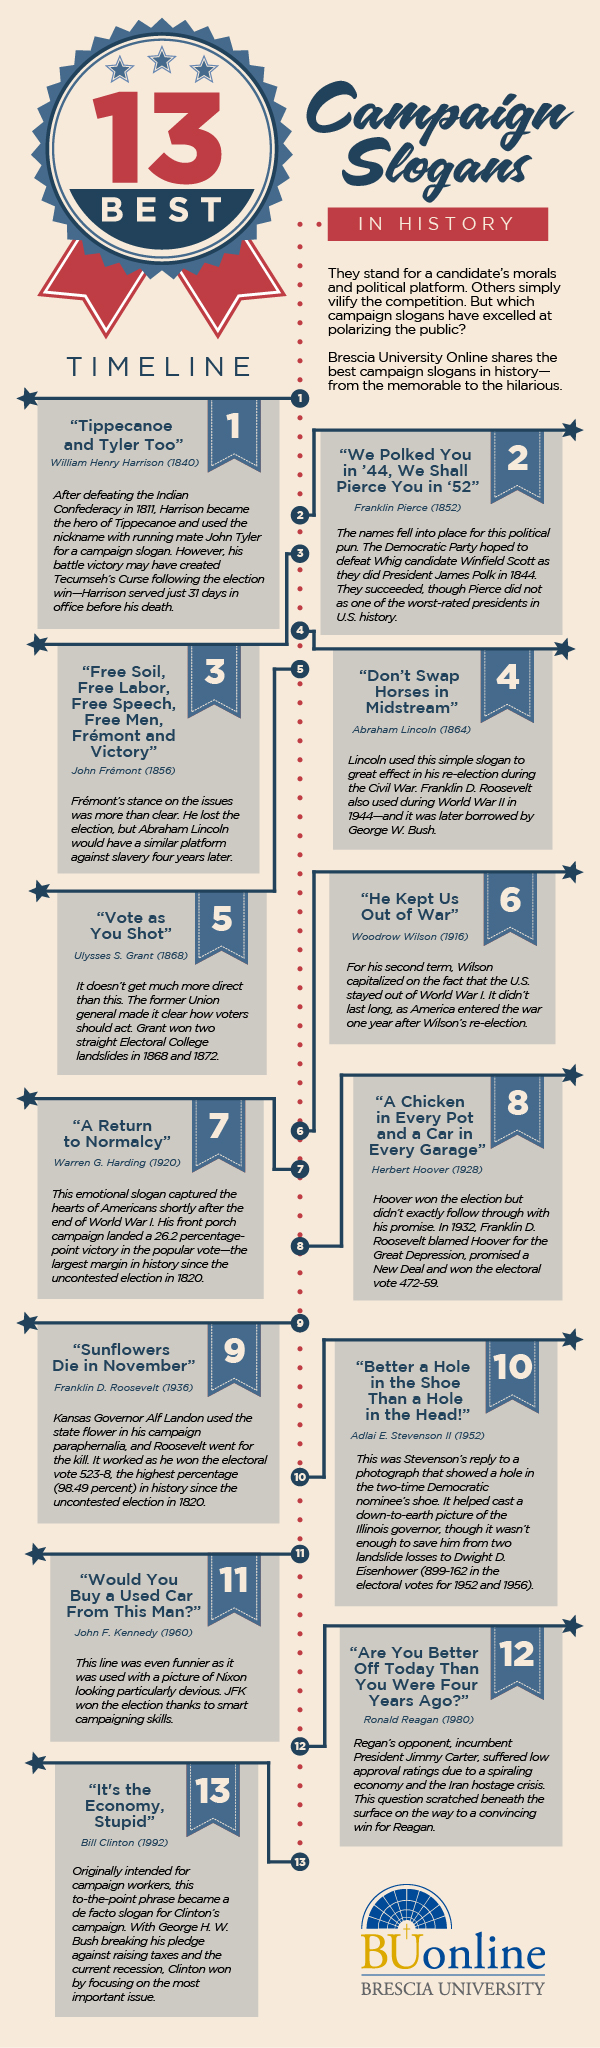 The 13 Best Campaign Slogans in History (Infographic)